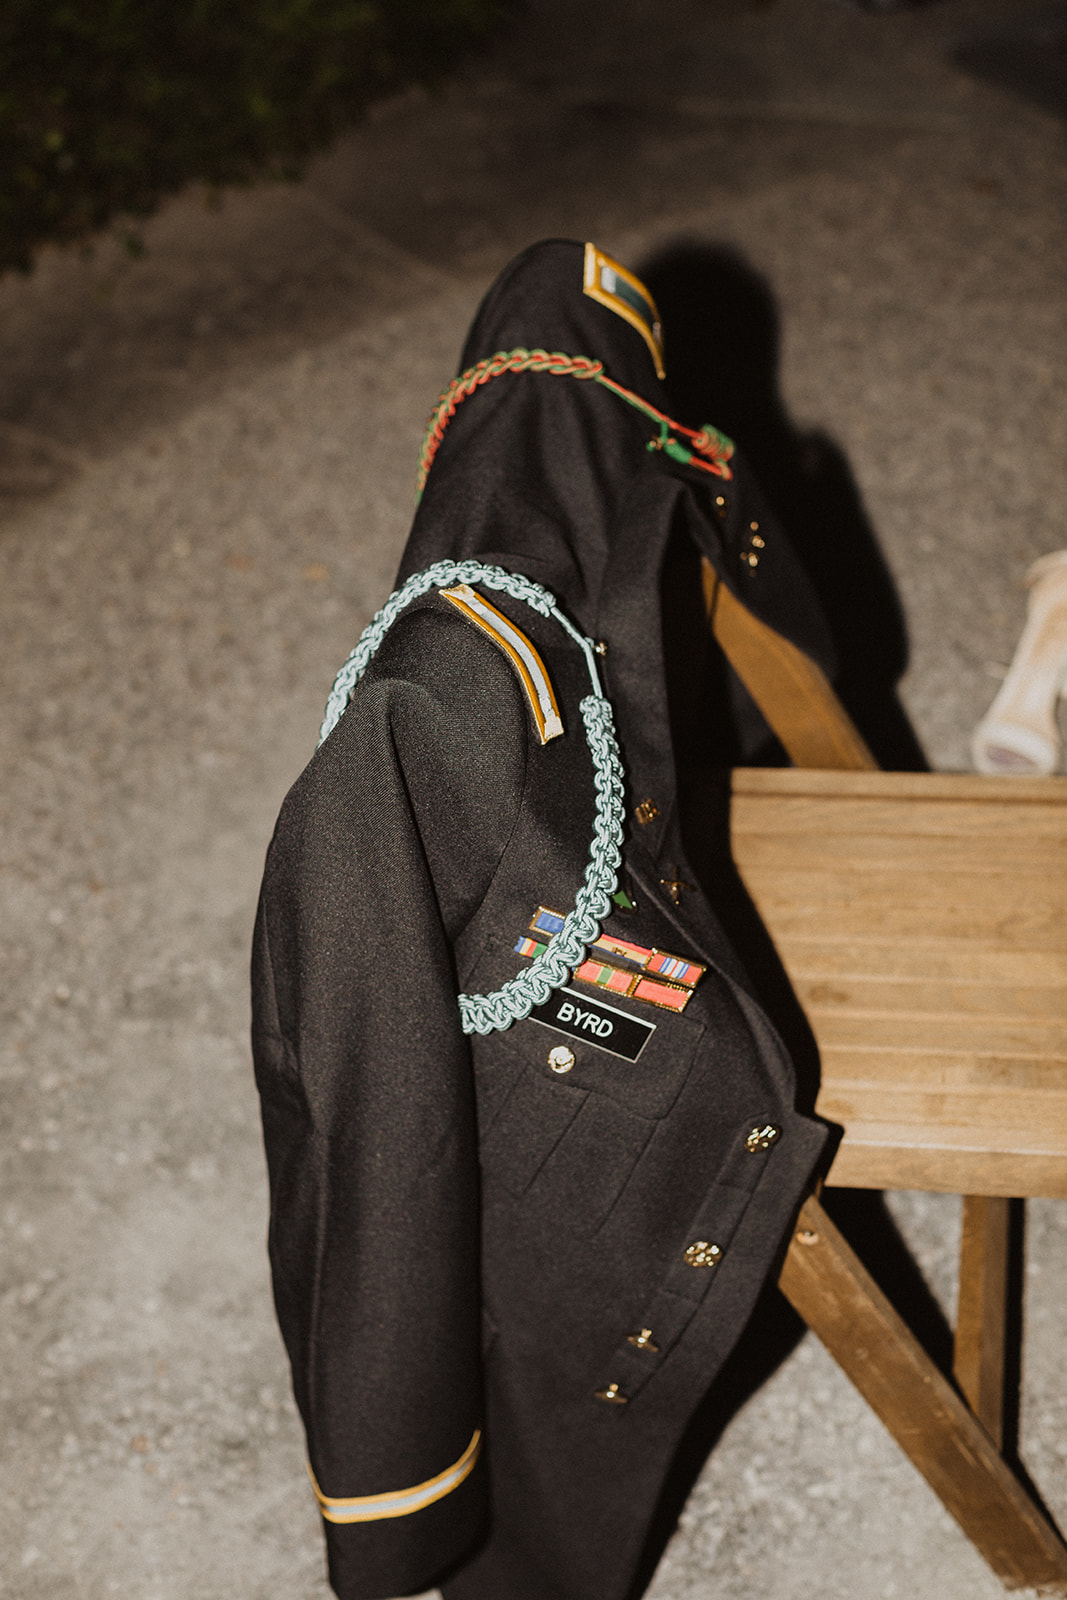 Groom's army officer uniform on chair